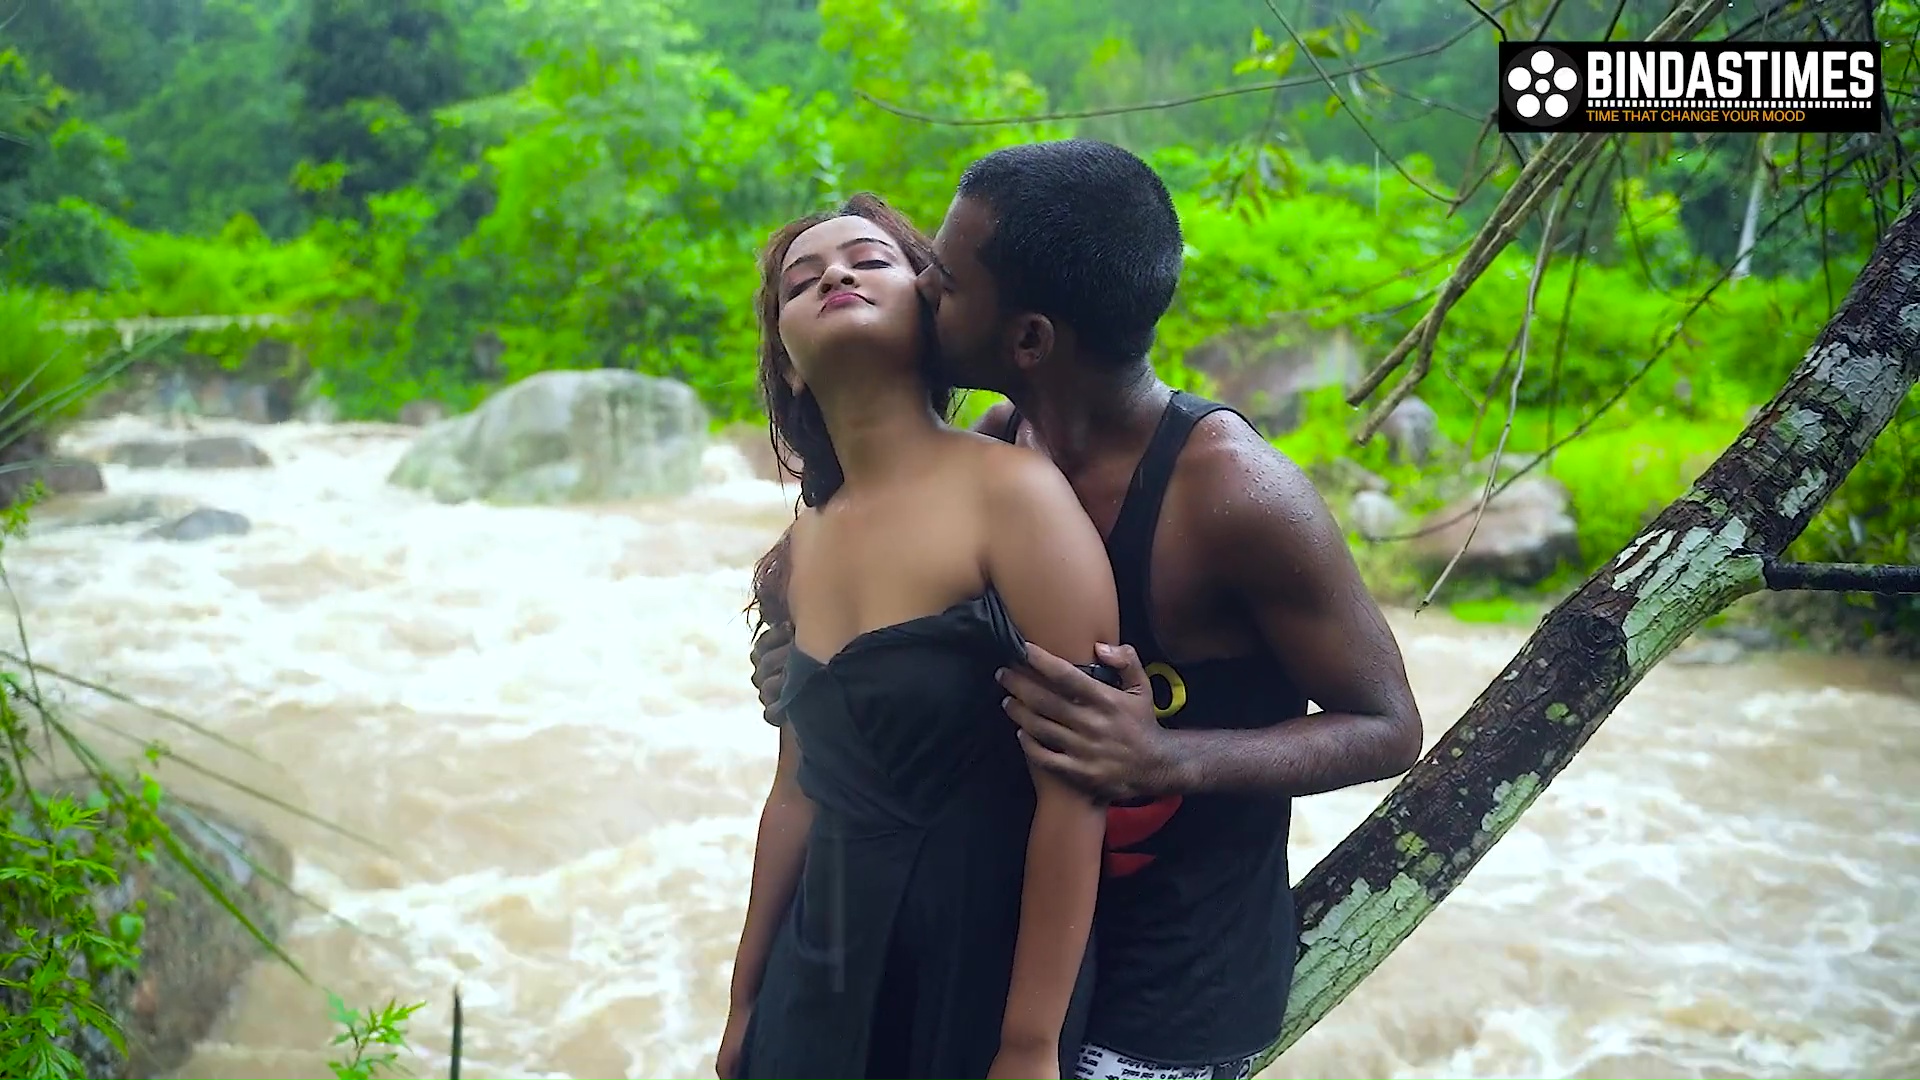 Desi Couple Sex In Jungle (2022) Hindi | x264 WEB-DL | 1080p | 720p | 480p | BindasTimes Short Films | Download | Watch Online | GDrive | Direct Links